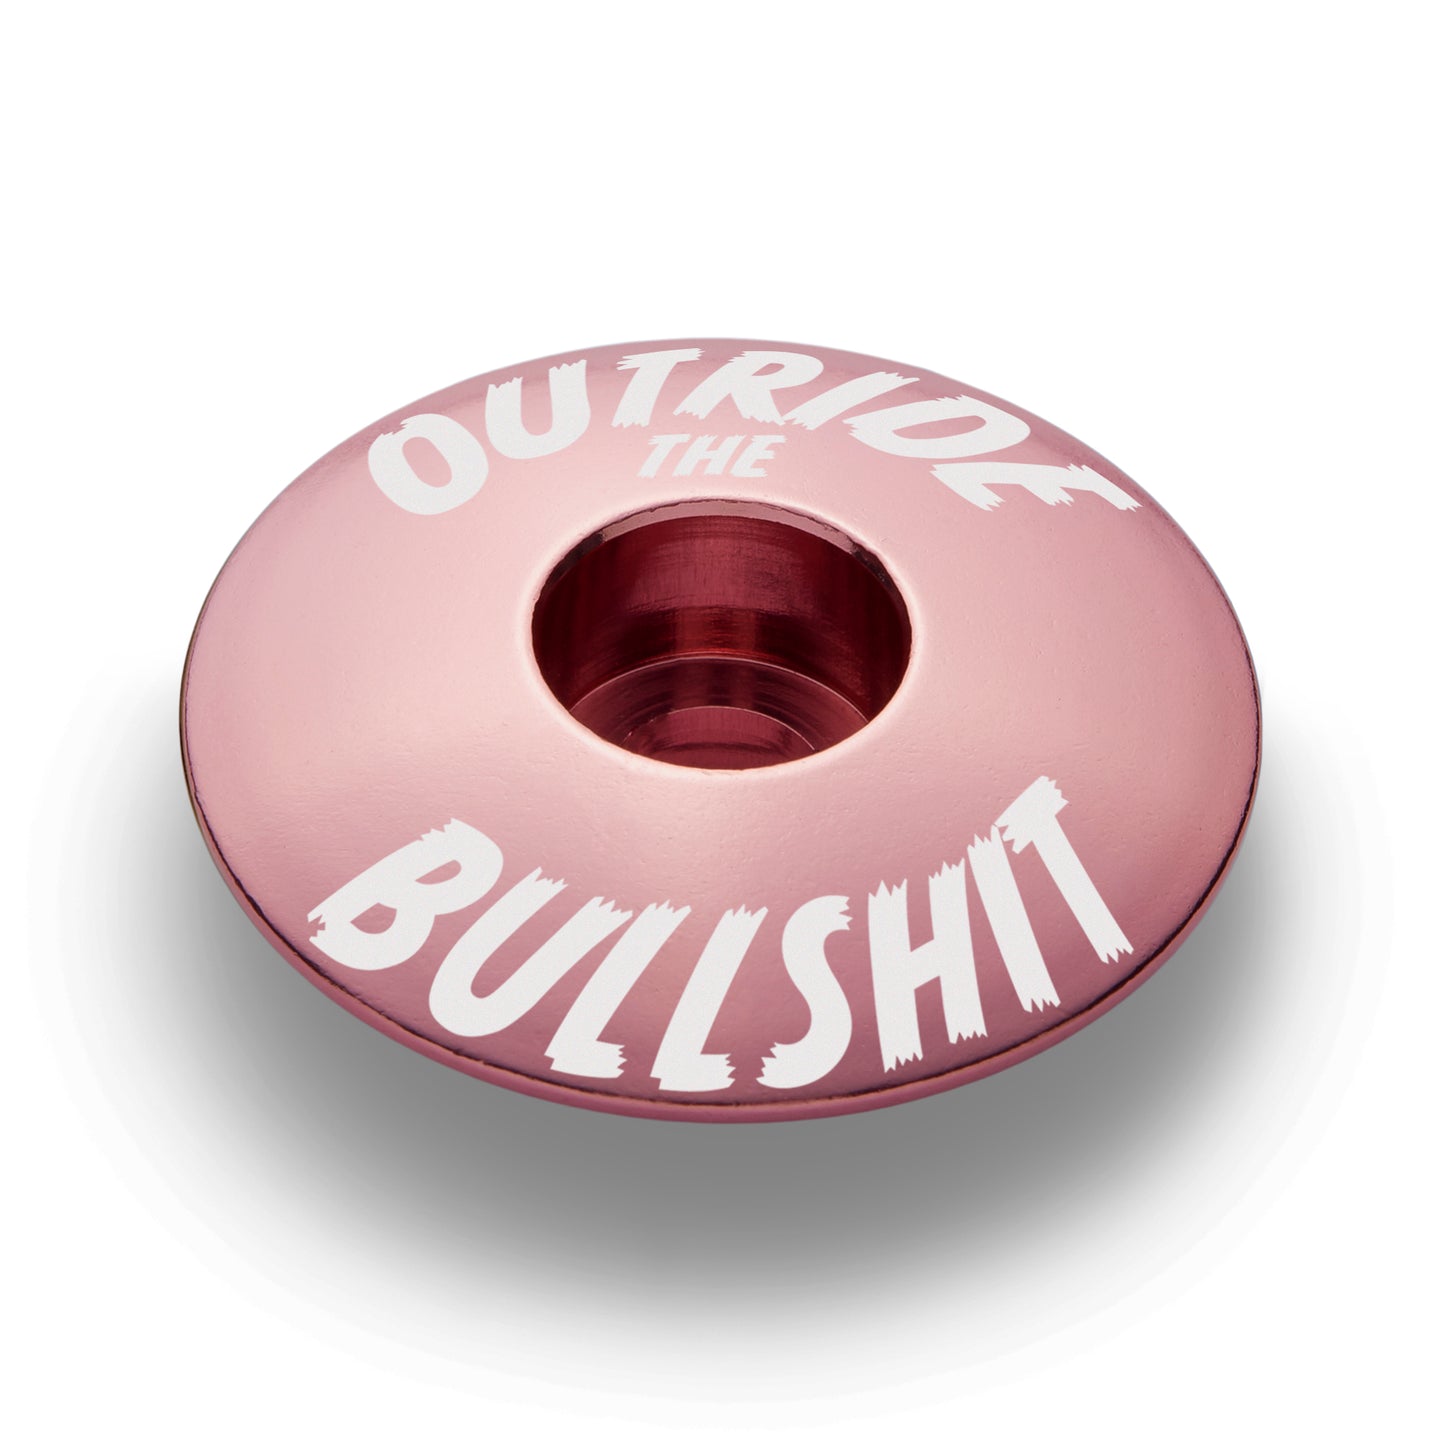 Outride The Bullshit Bicycle Headset Cap